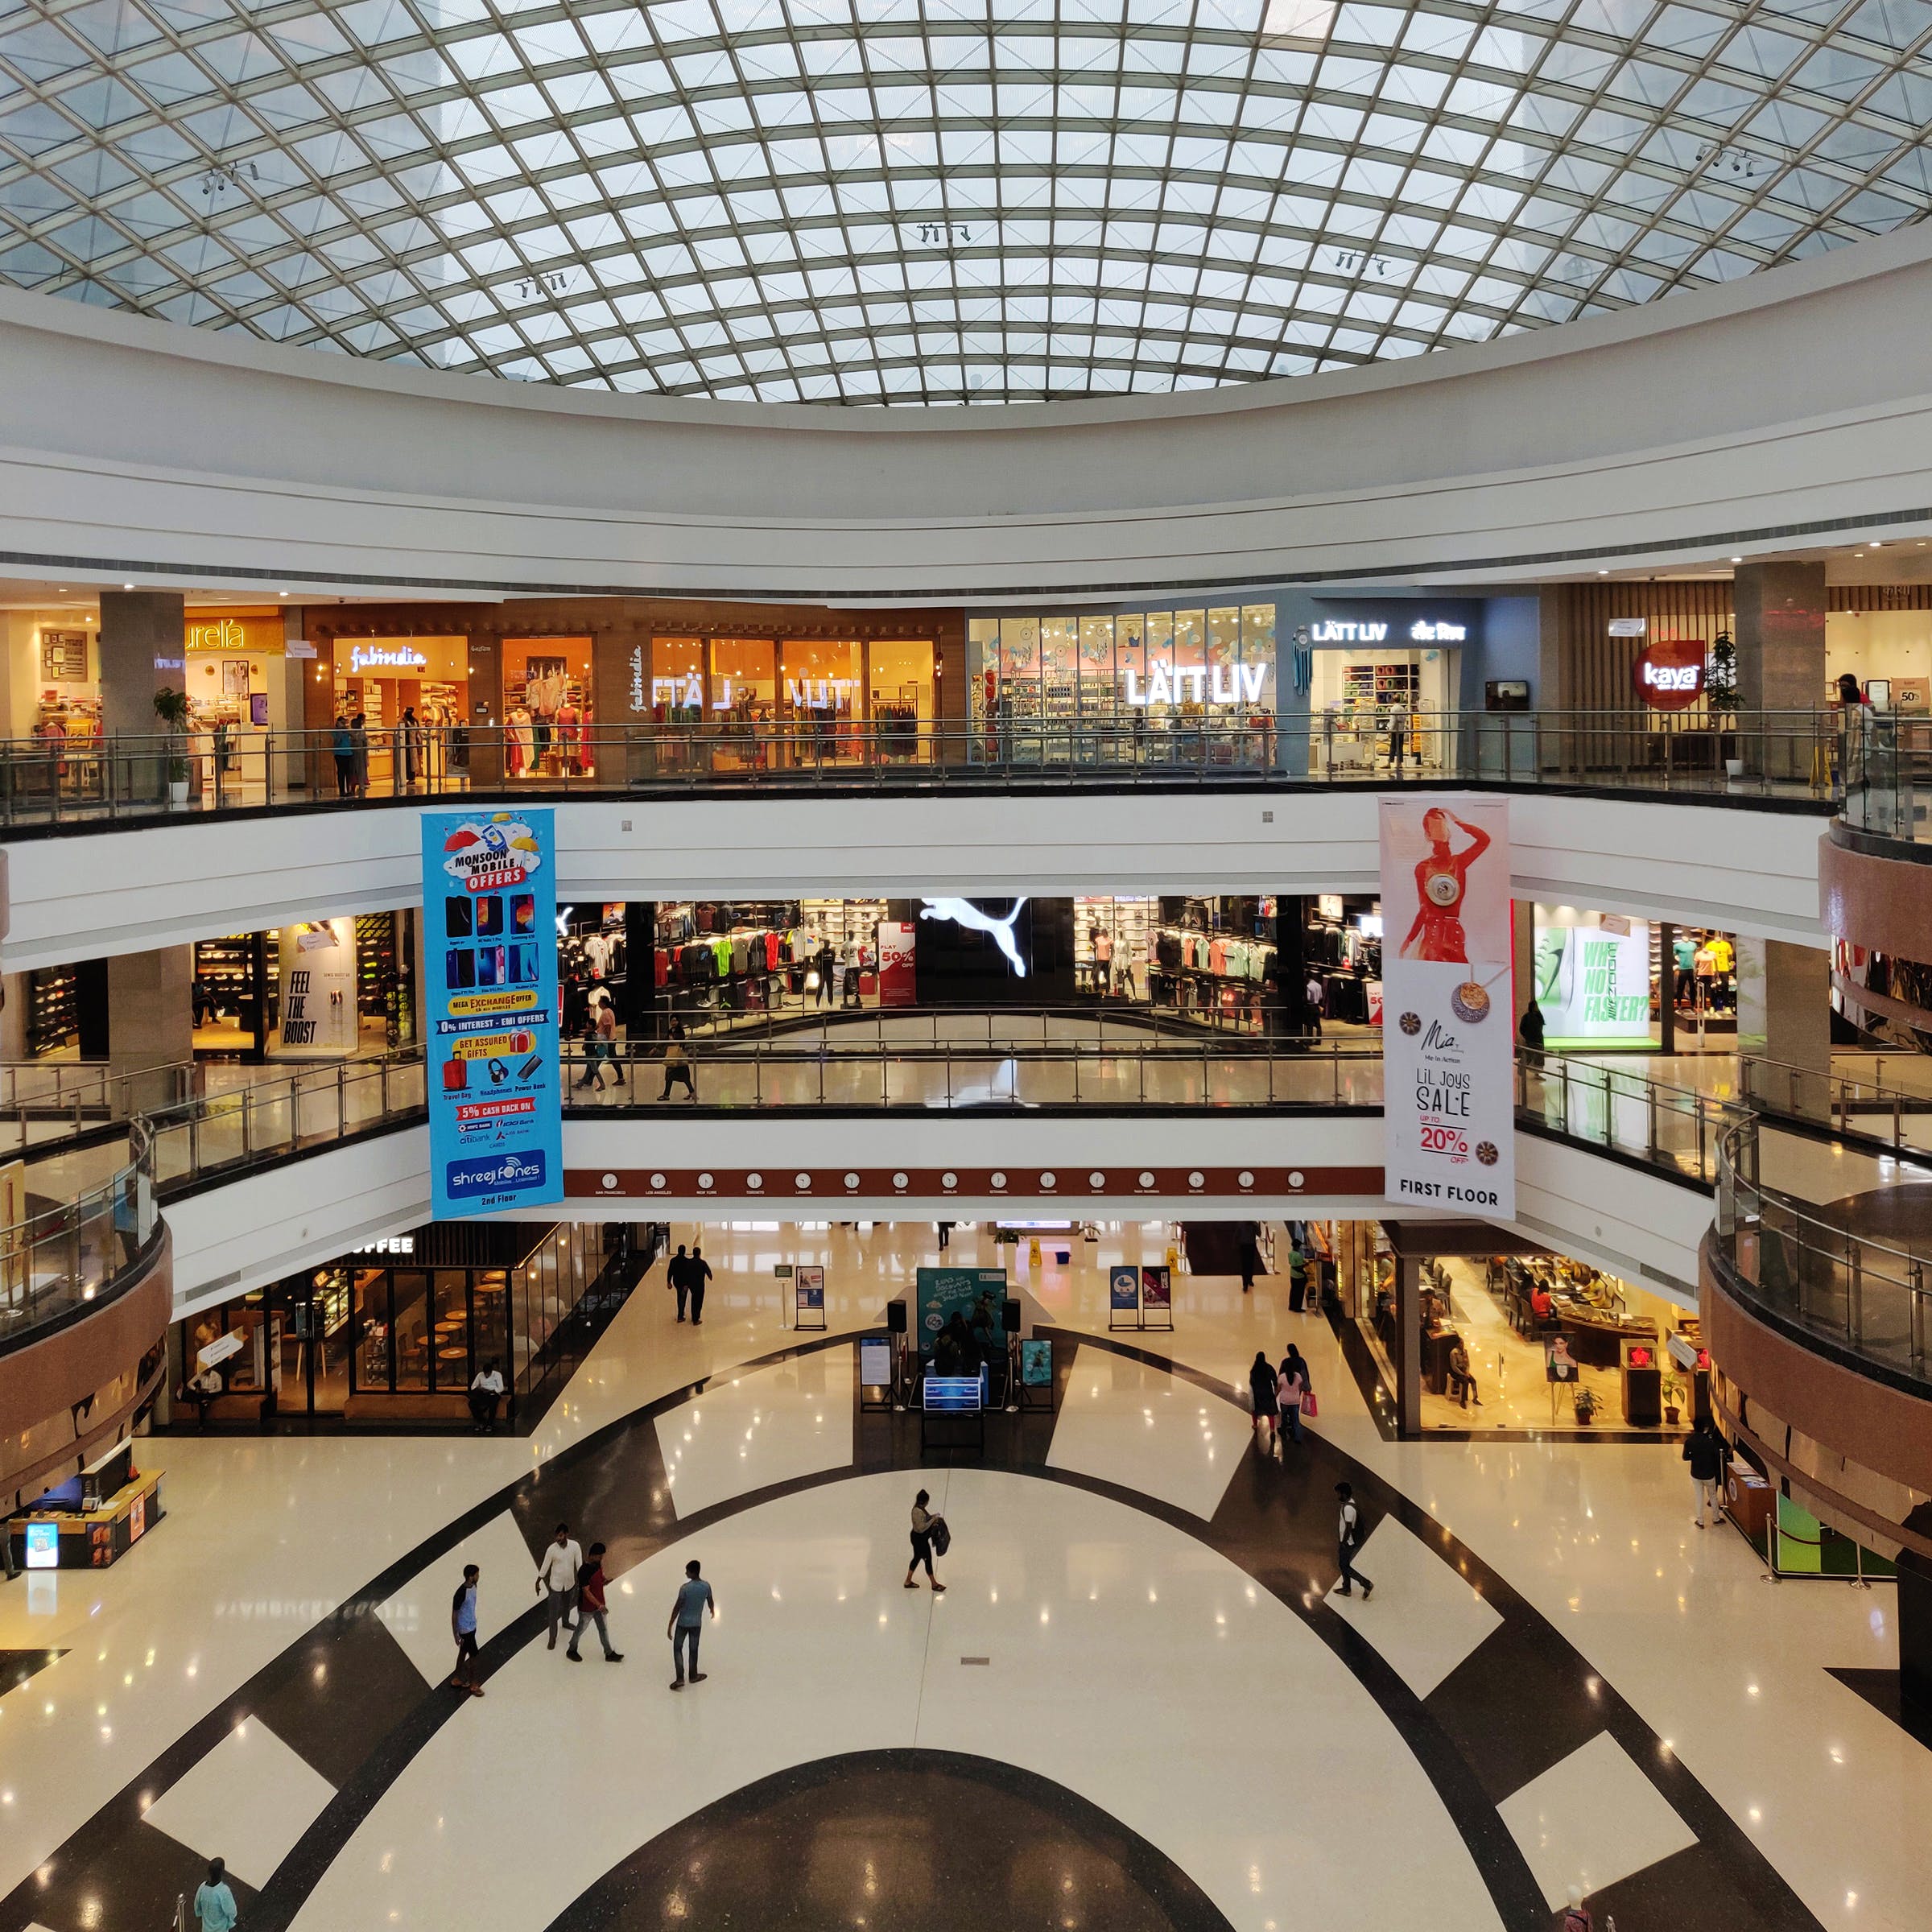 Shopping mall,Building,Retail,Architecture,Lobby,Interior design,Mixed-use,Shopping,Ceiling